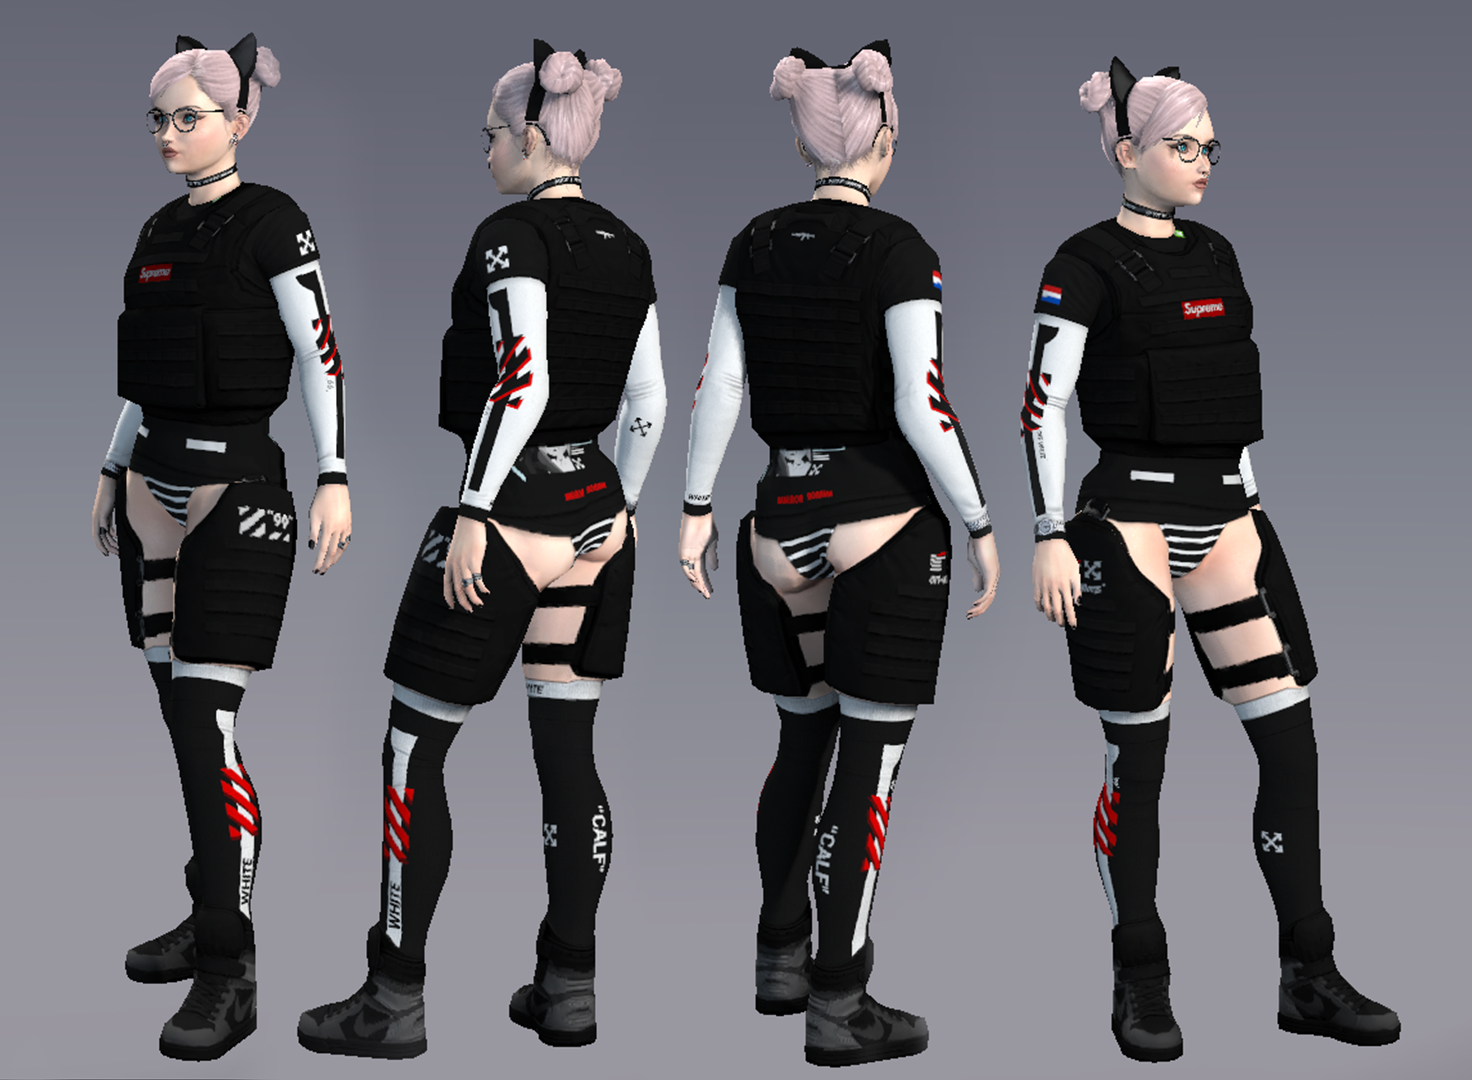 Image OW Project - PC in APB Reloaded Clothing album.